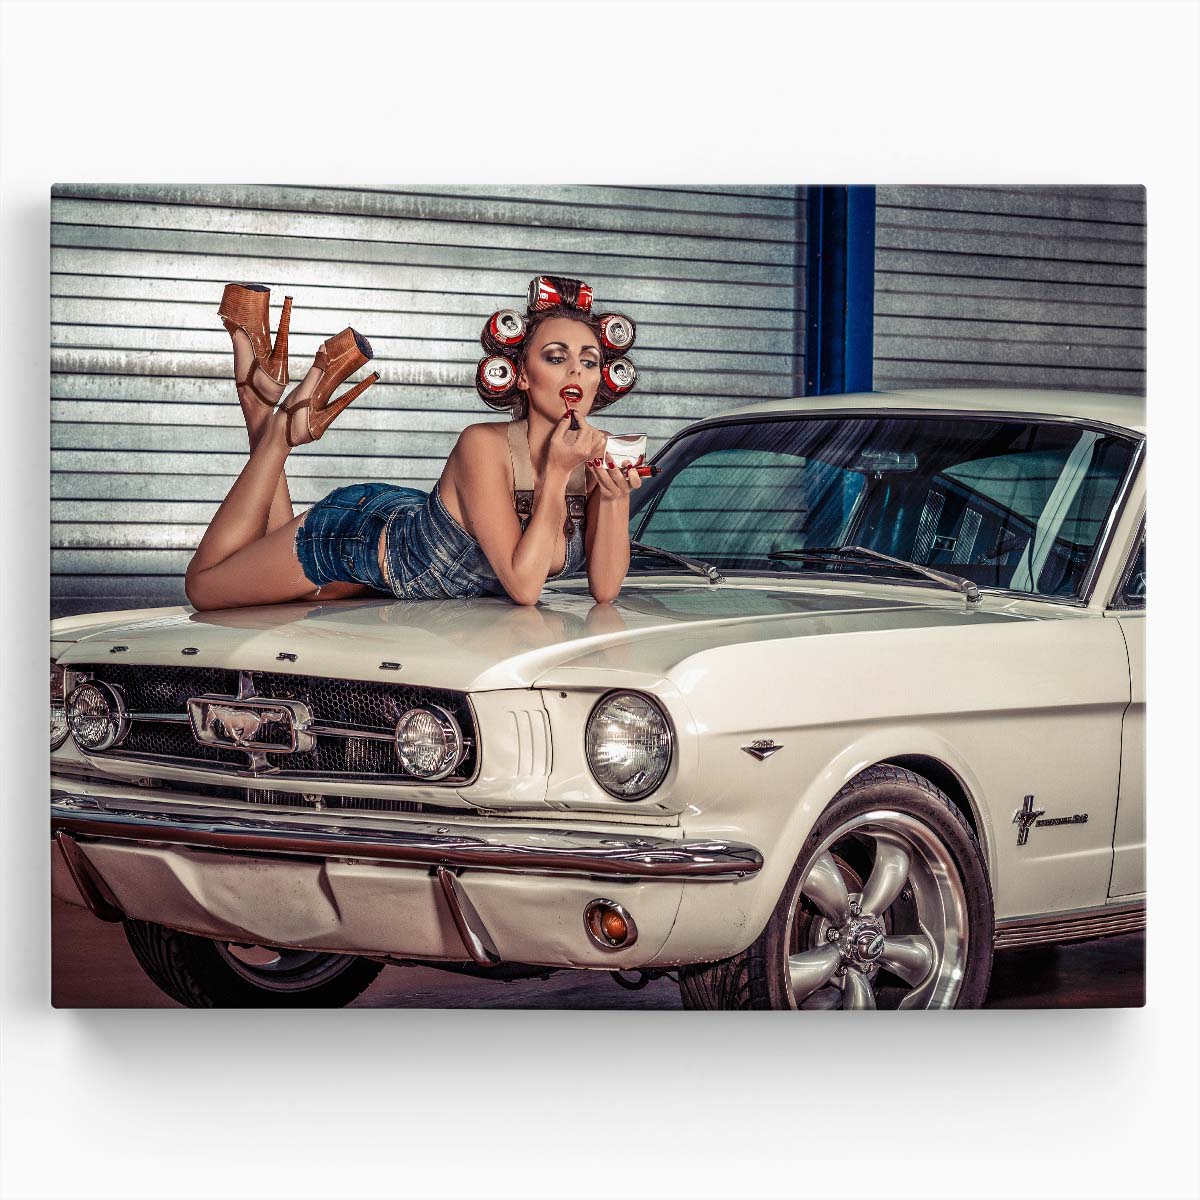 Vintage Pin-Up Girl on Classic Mustang Photography Wall Art by Luxuriance Designs. Made in USA.